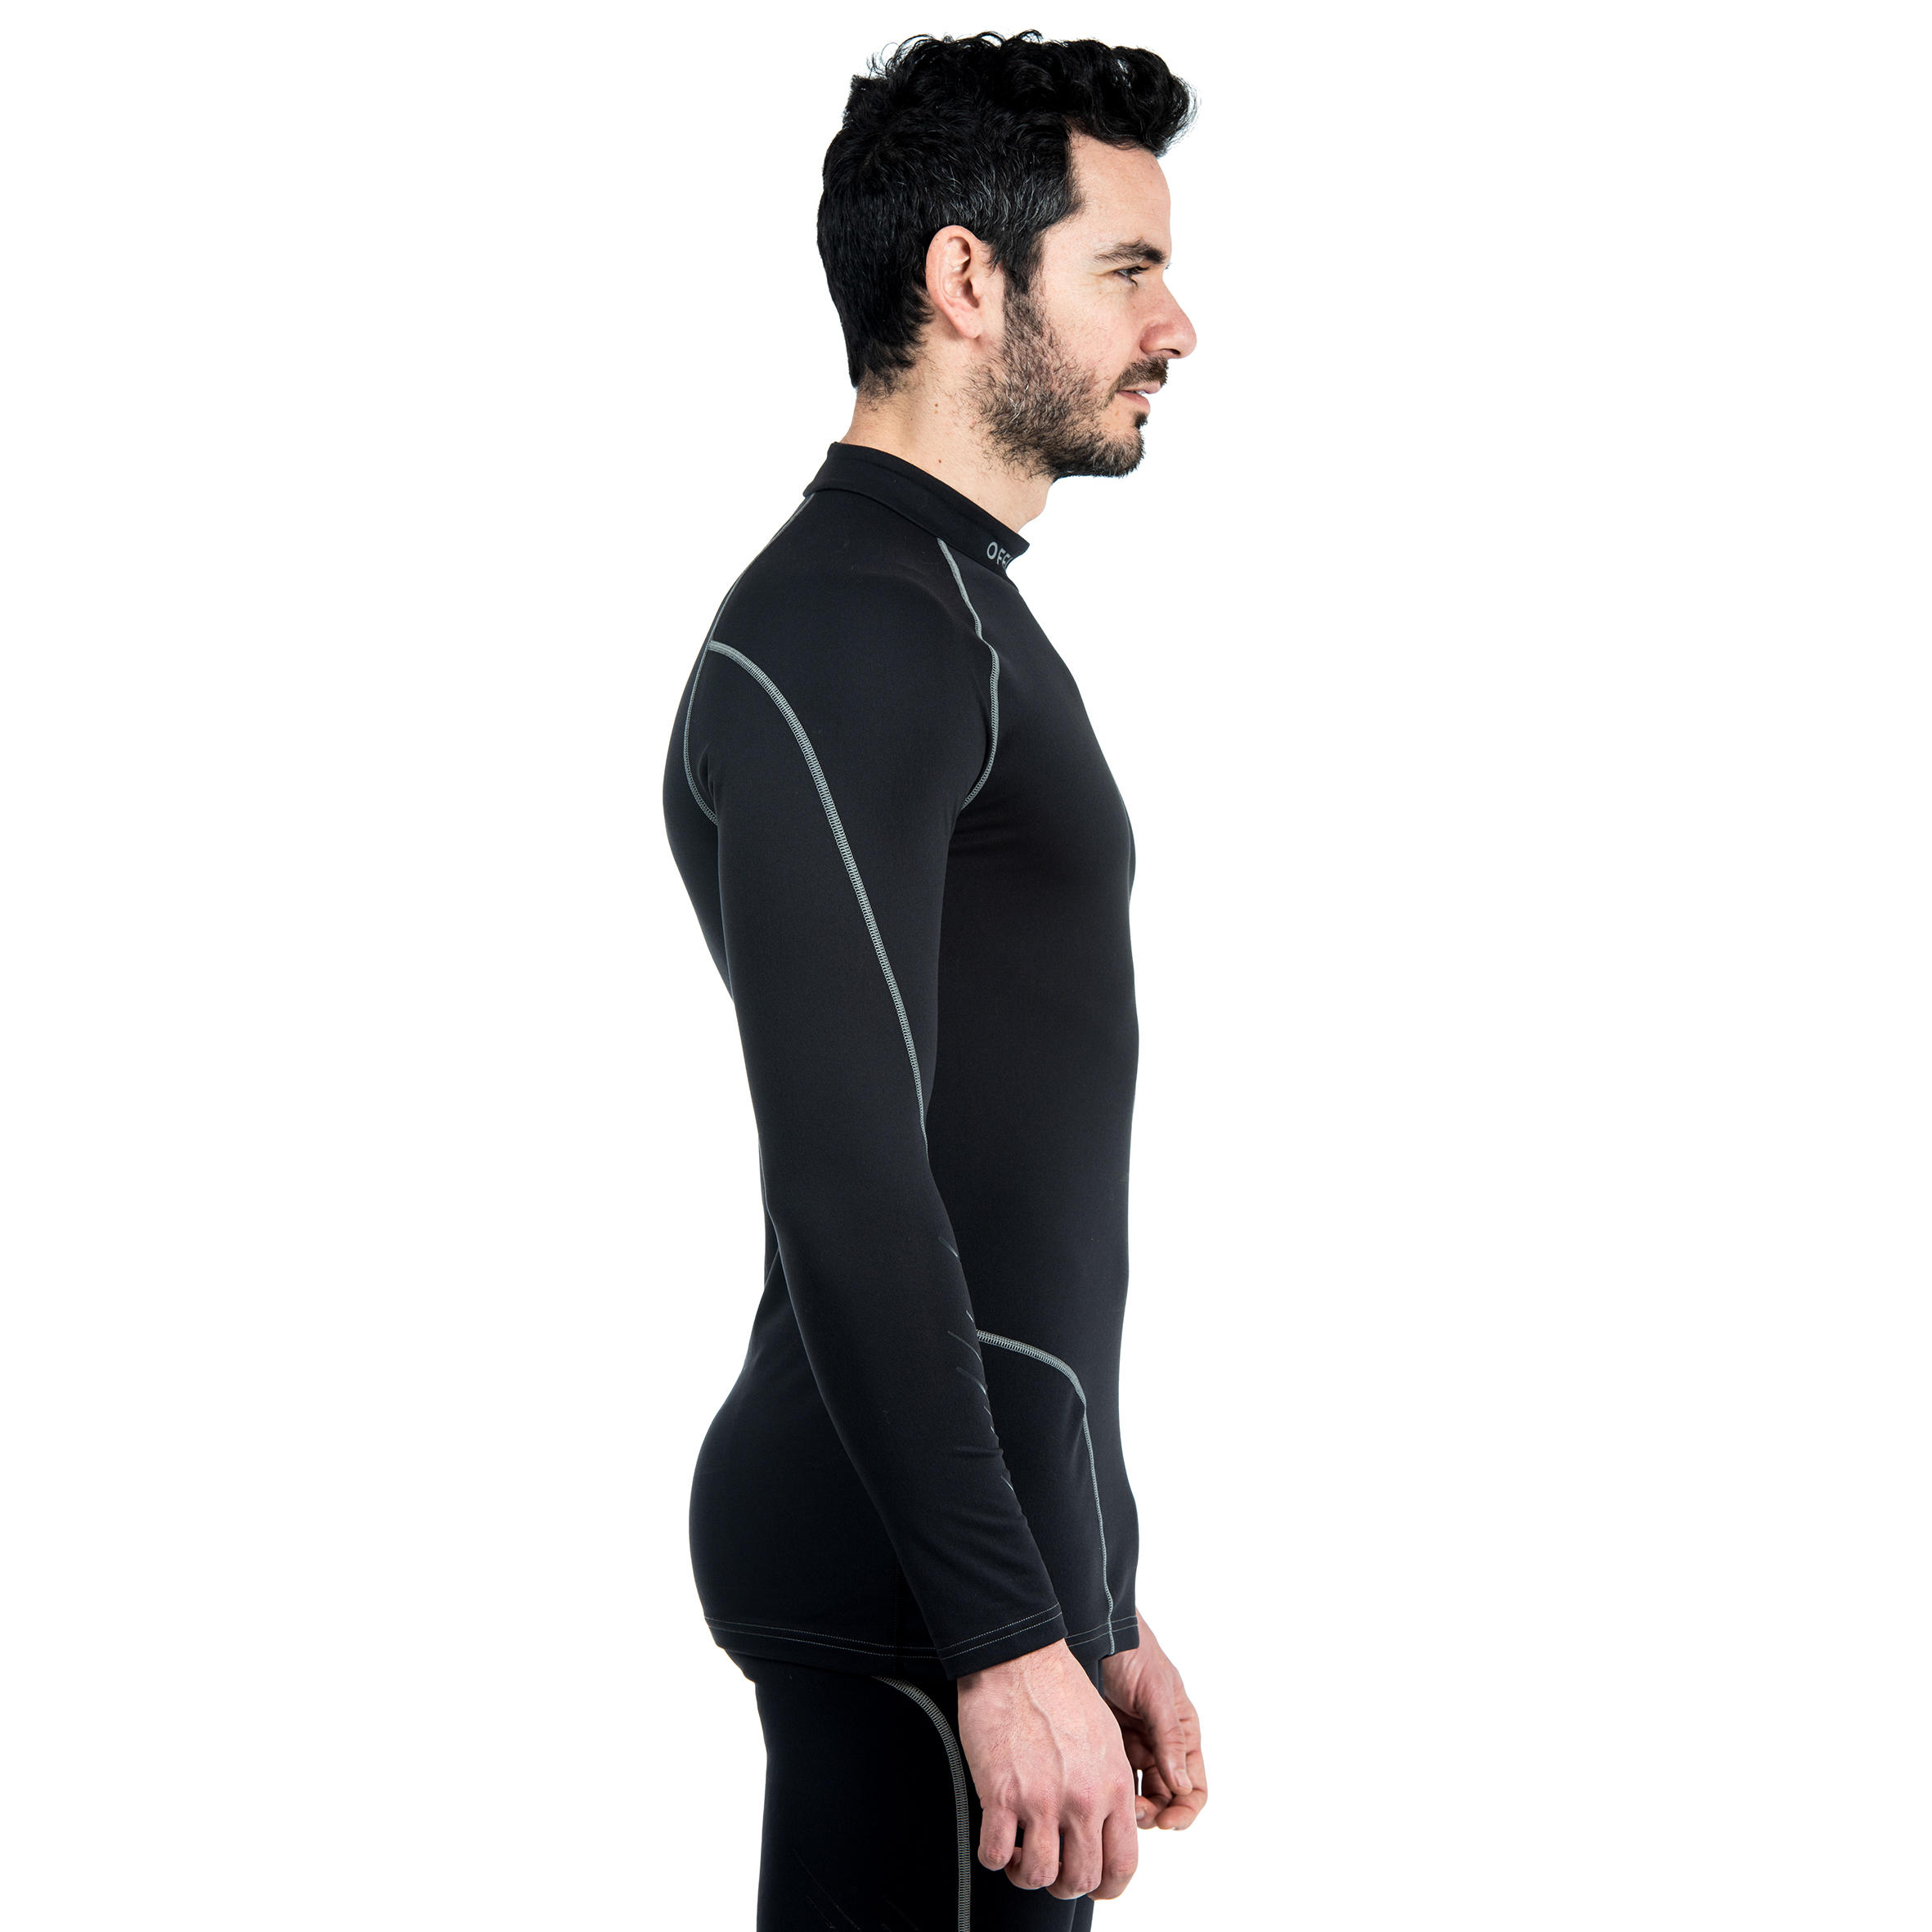 Men's Long-Sleeved Rugby Base Layer Top R500 - Black 7/10